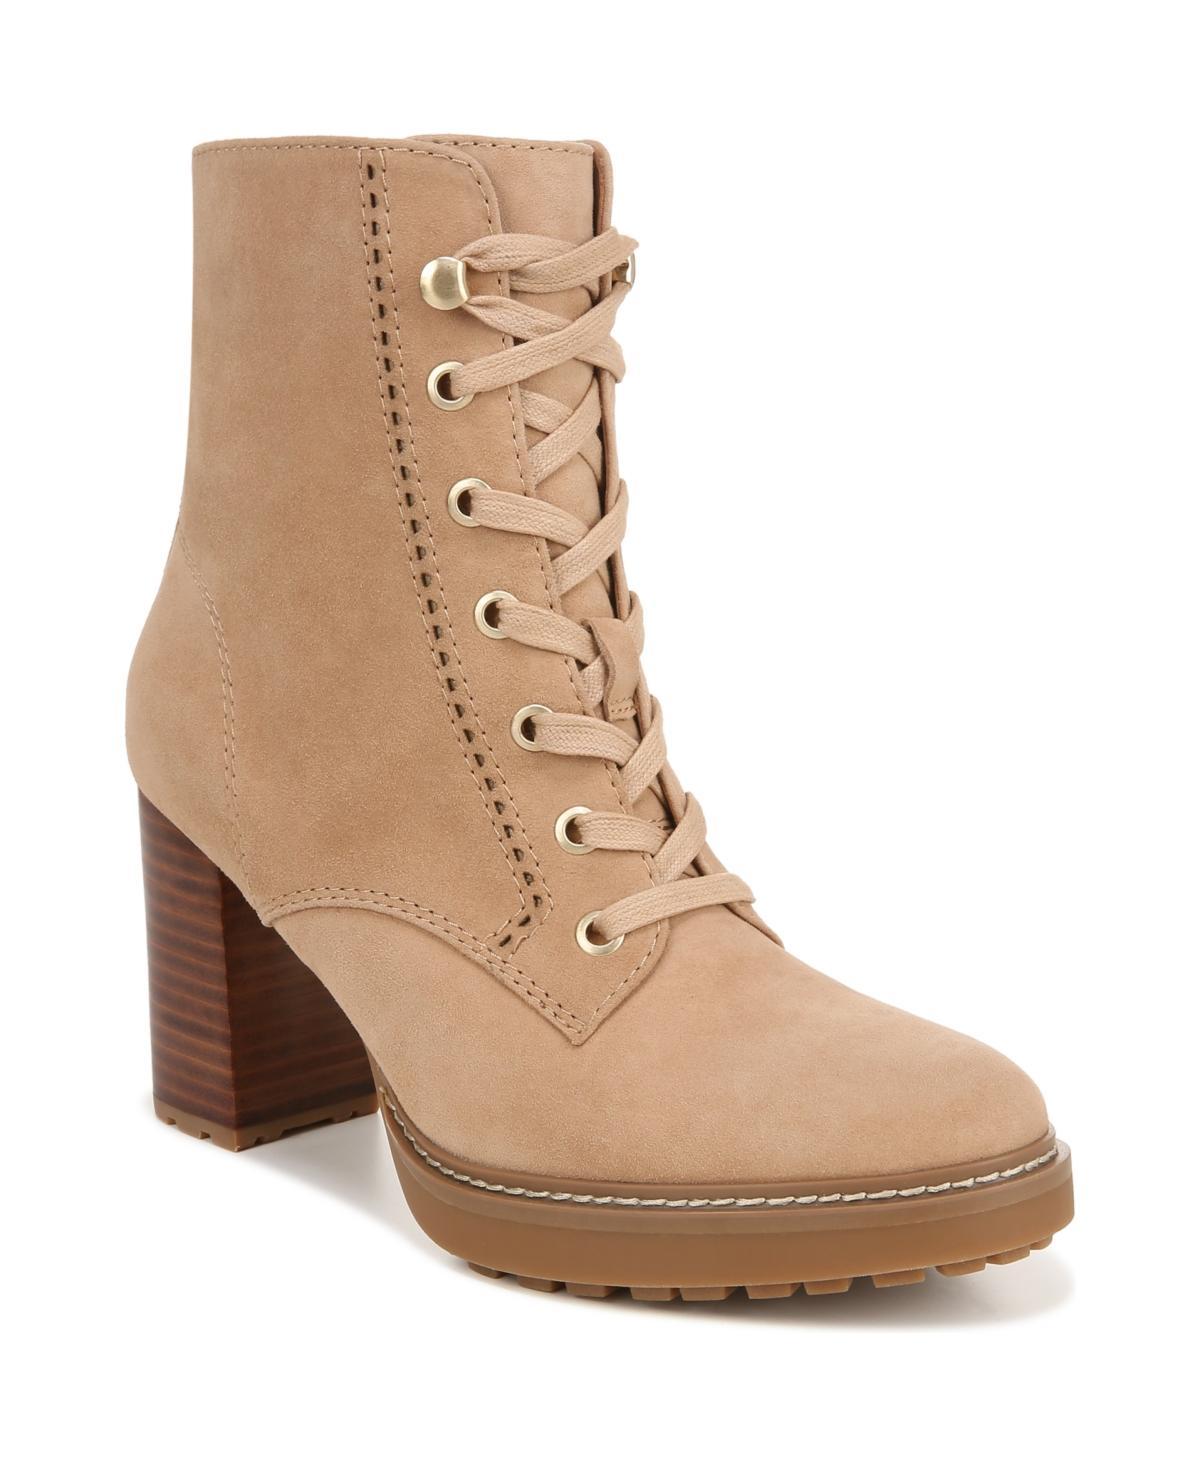 Naturalizer Callie Bootie Product Image